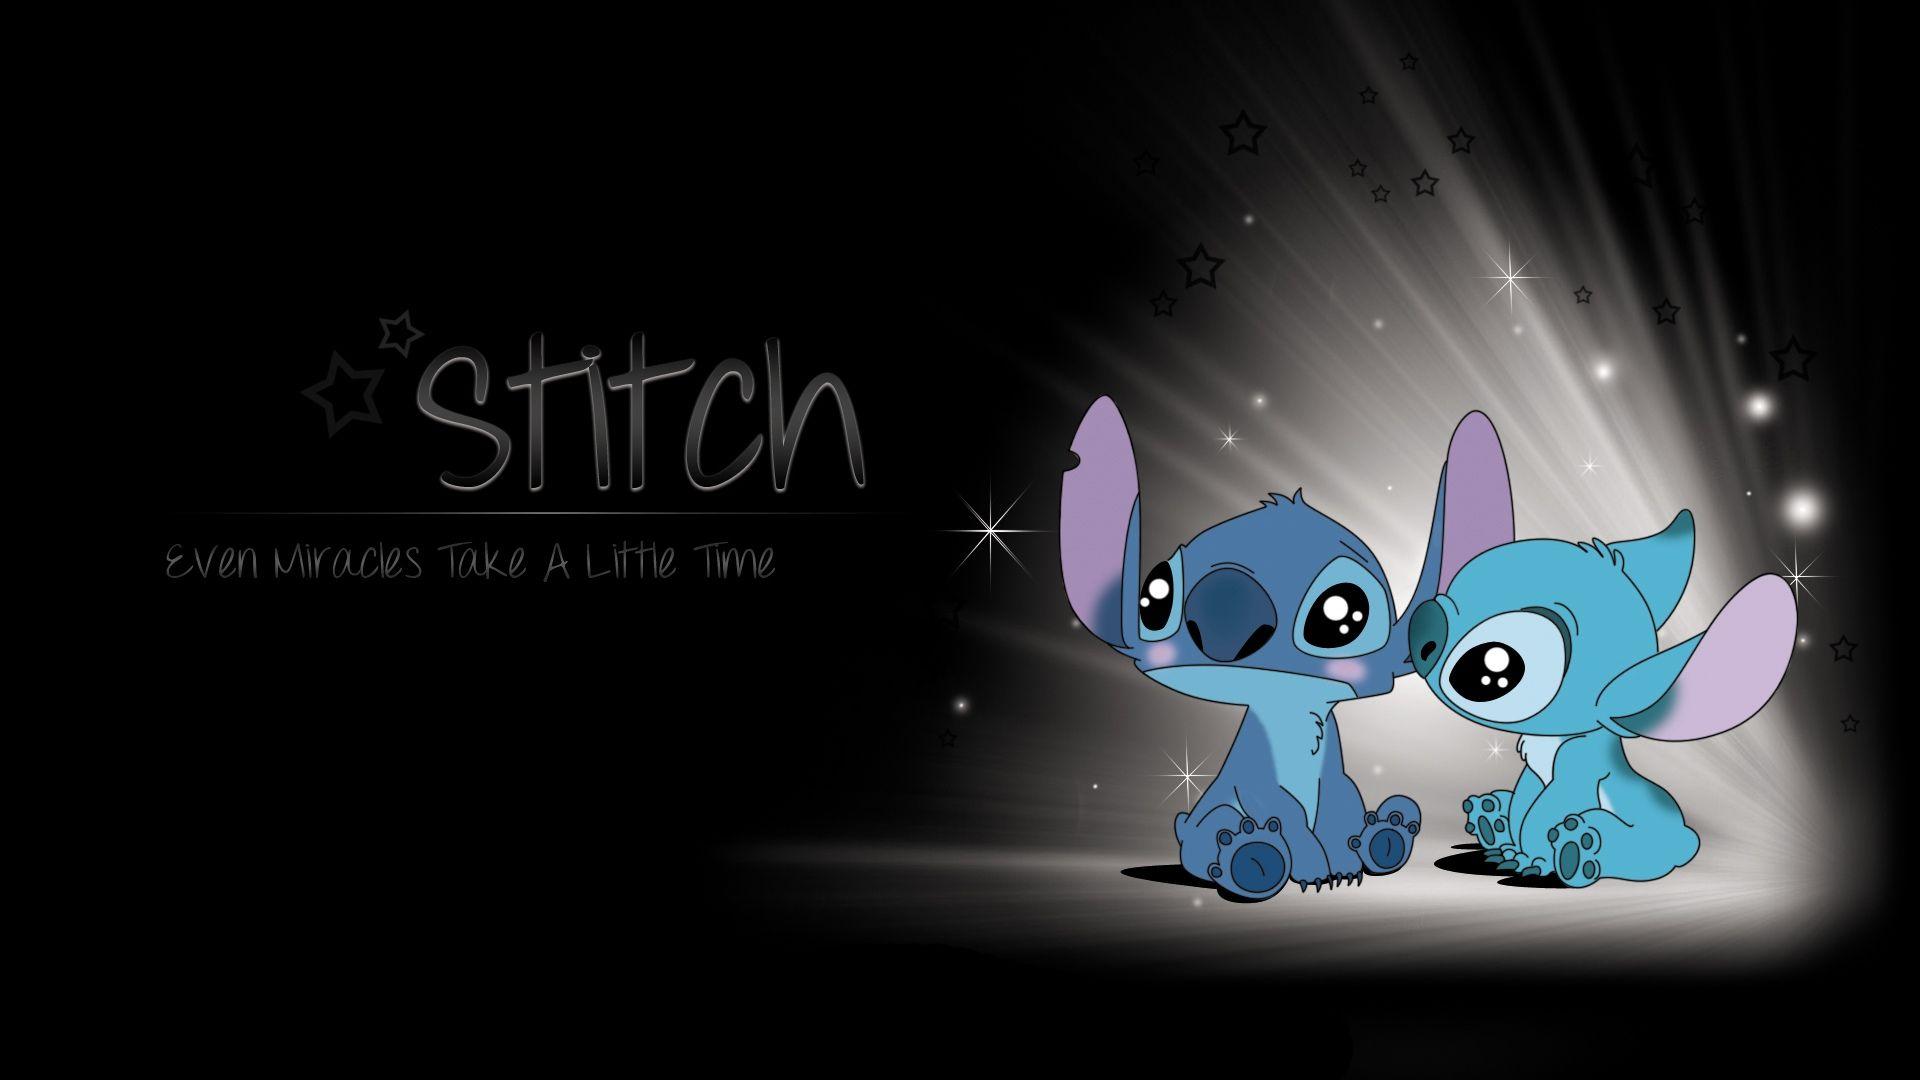 Cute kawaii stitch wallpaper by Addisonh - Download on ZEDGE™